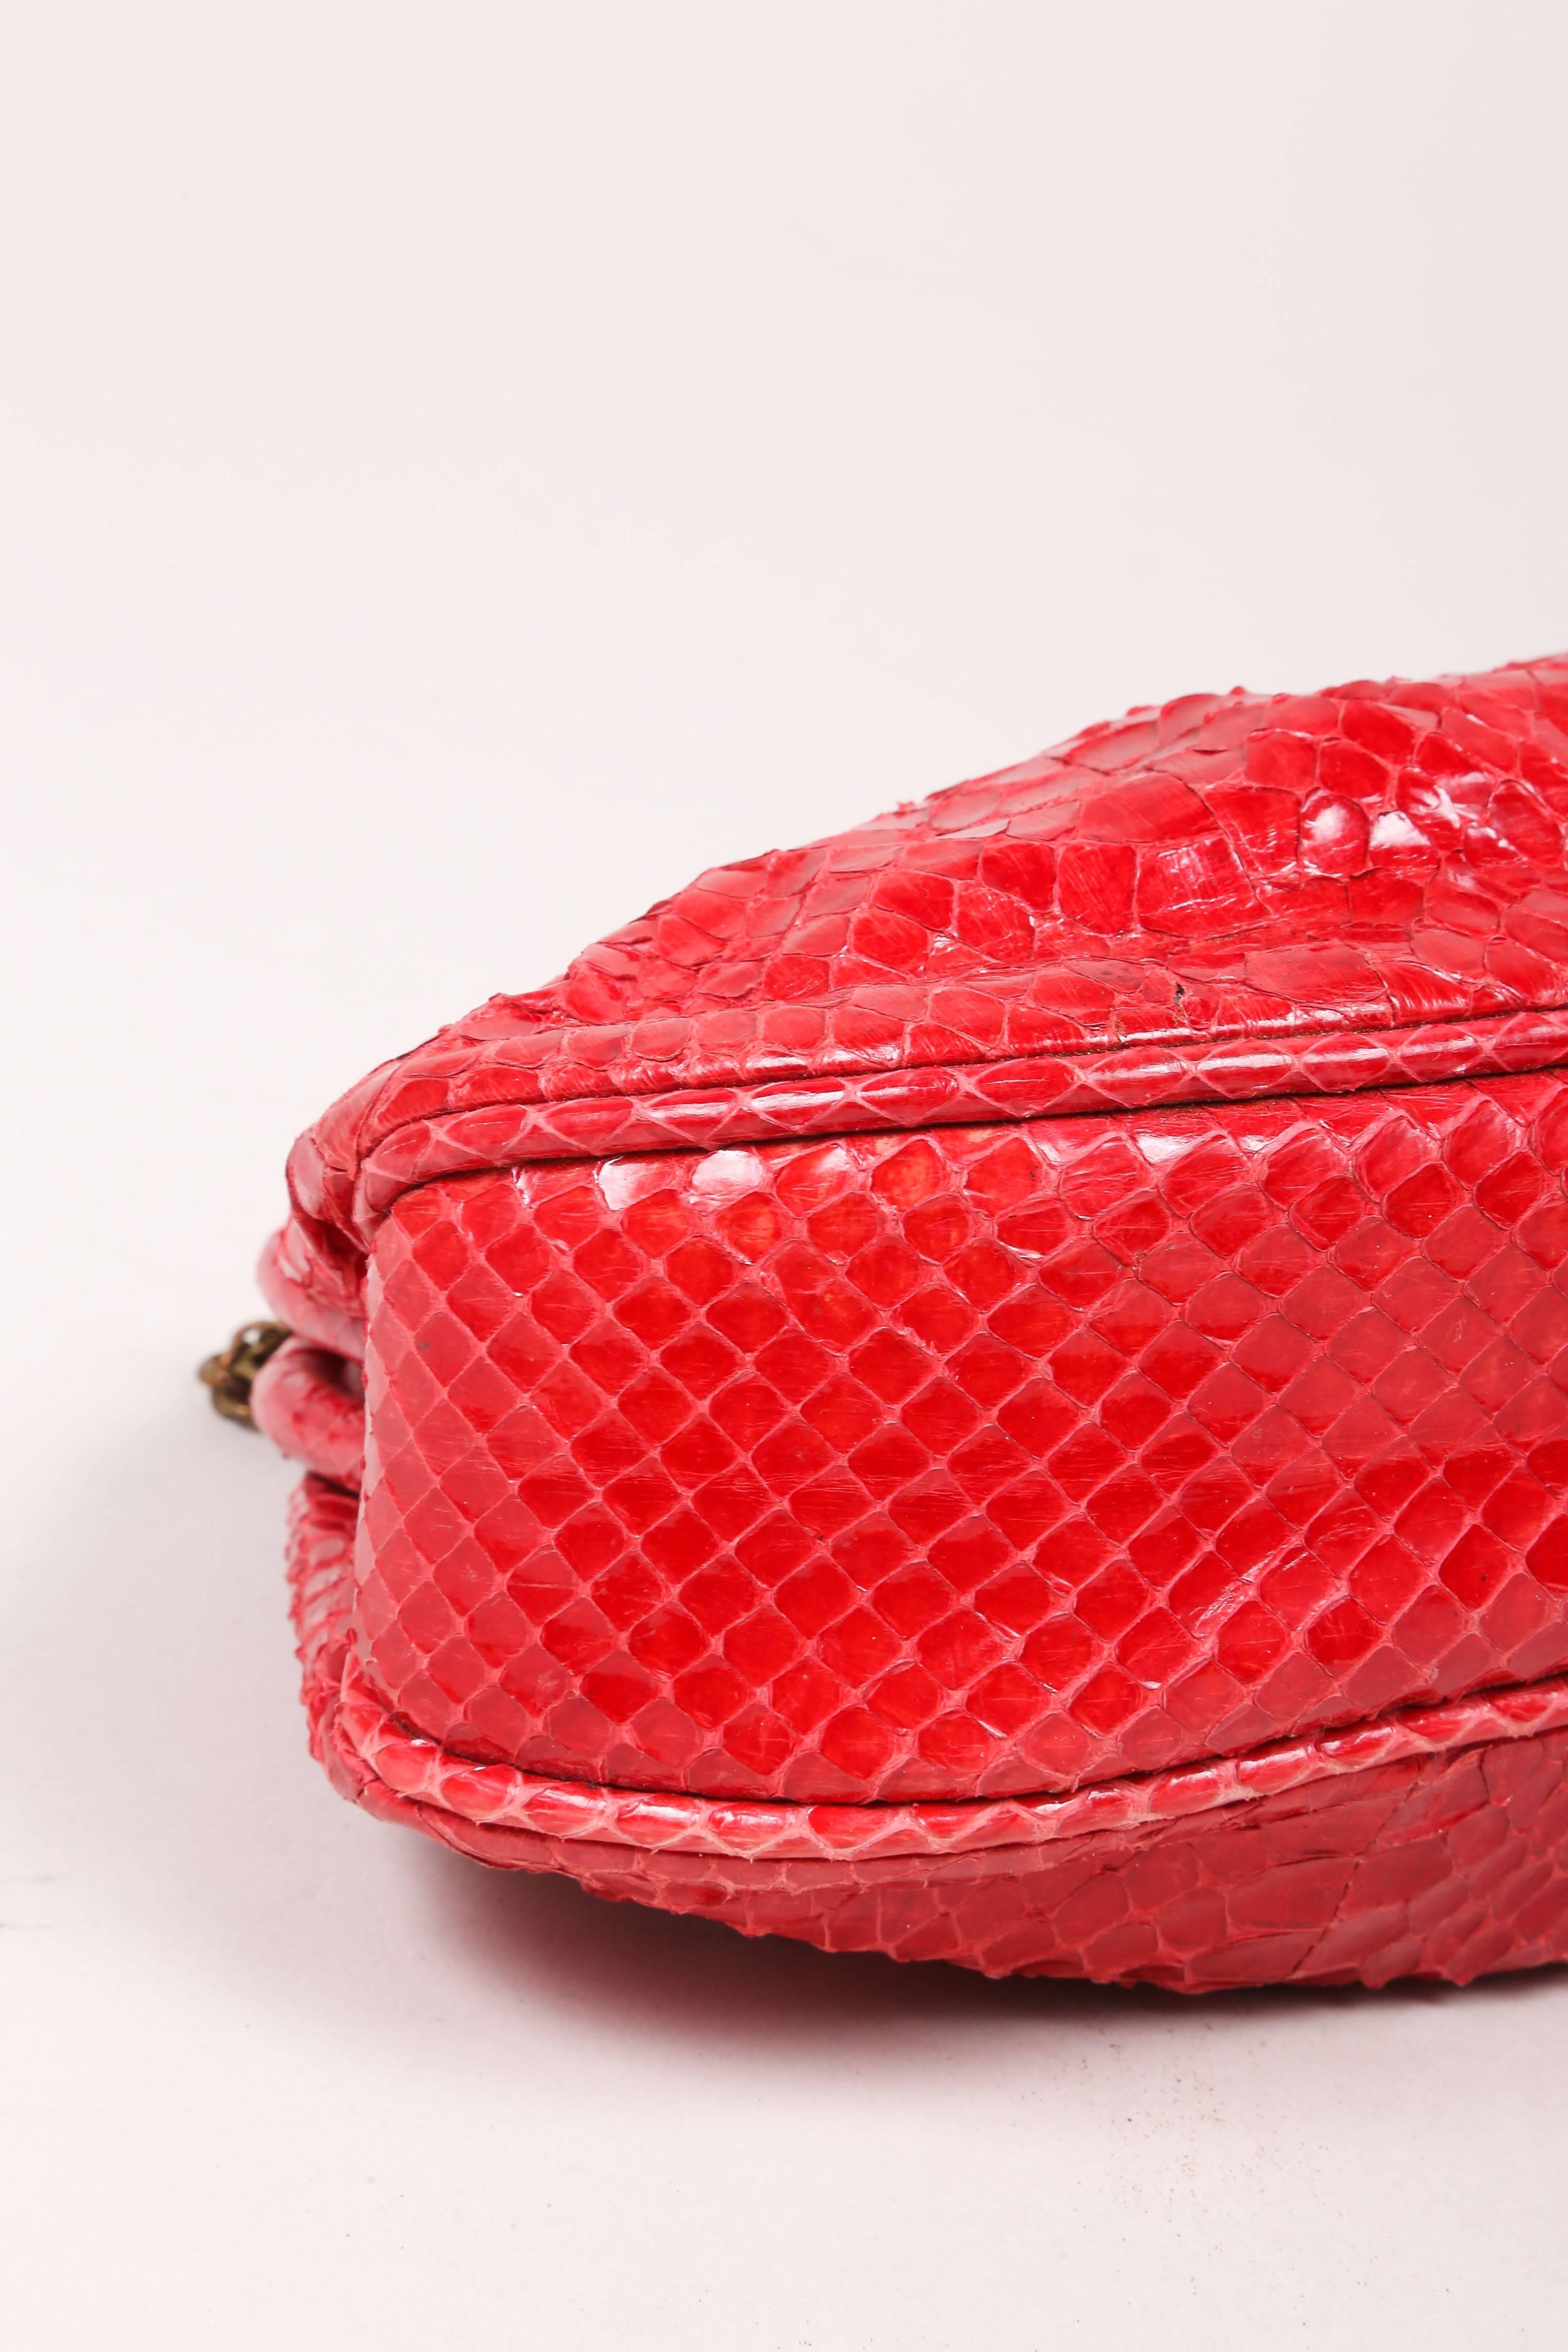 Vintage Chanel Red Python Top Snap Closure Clutch 3